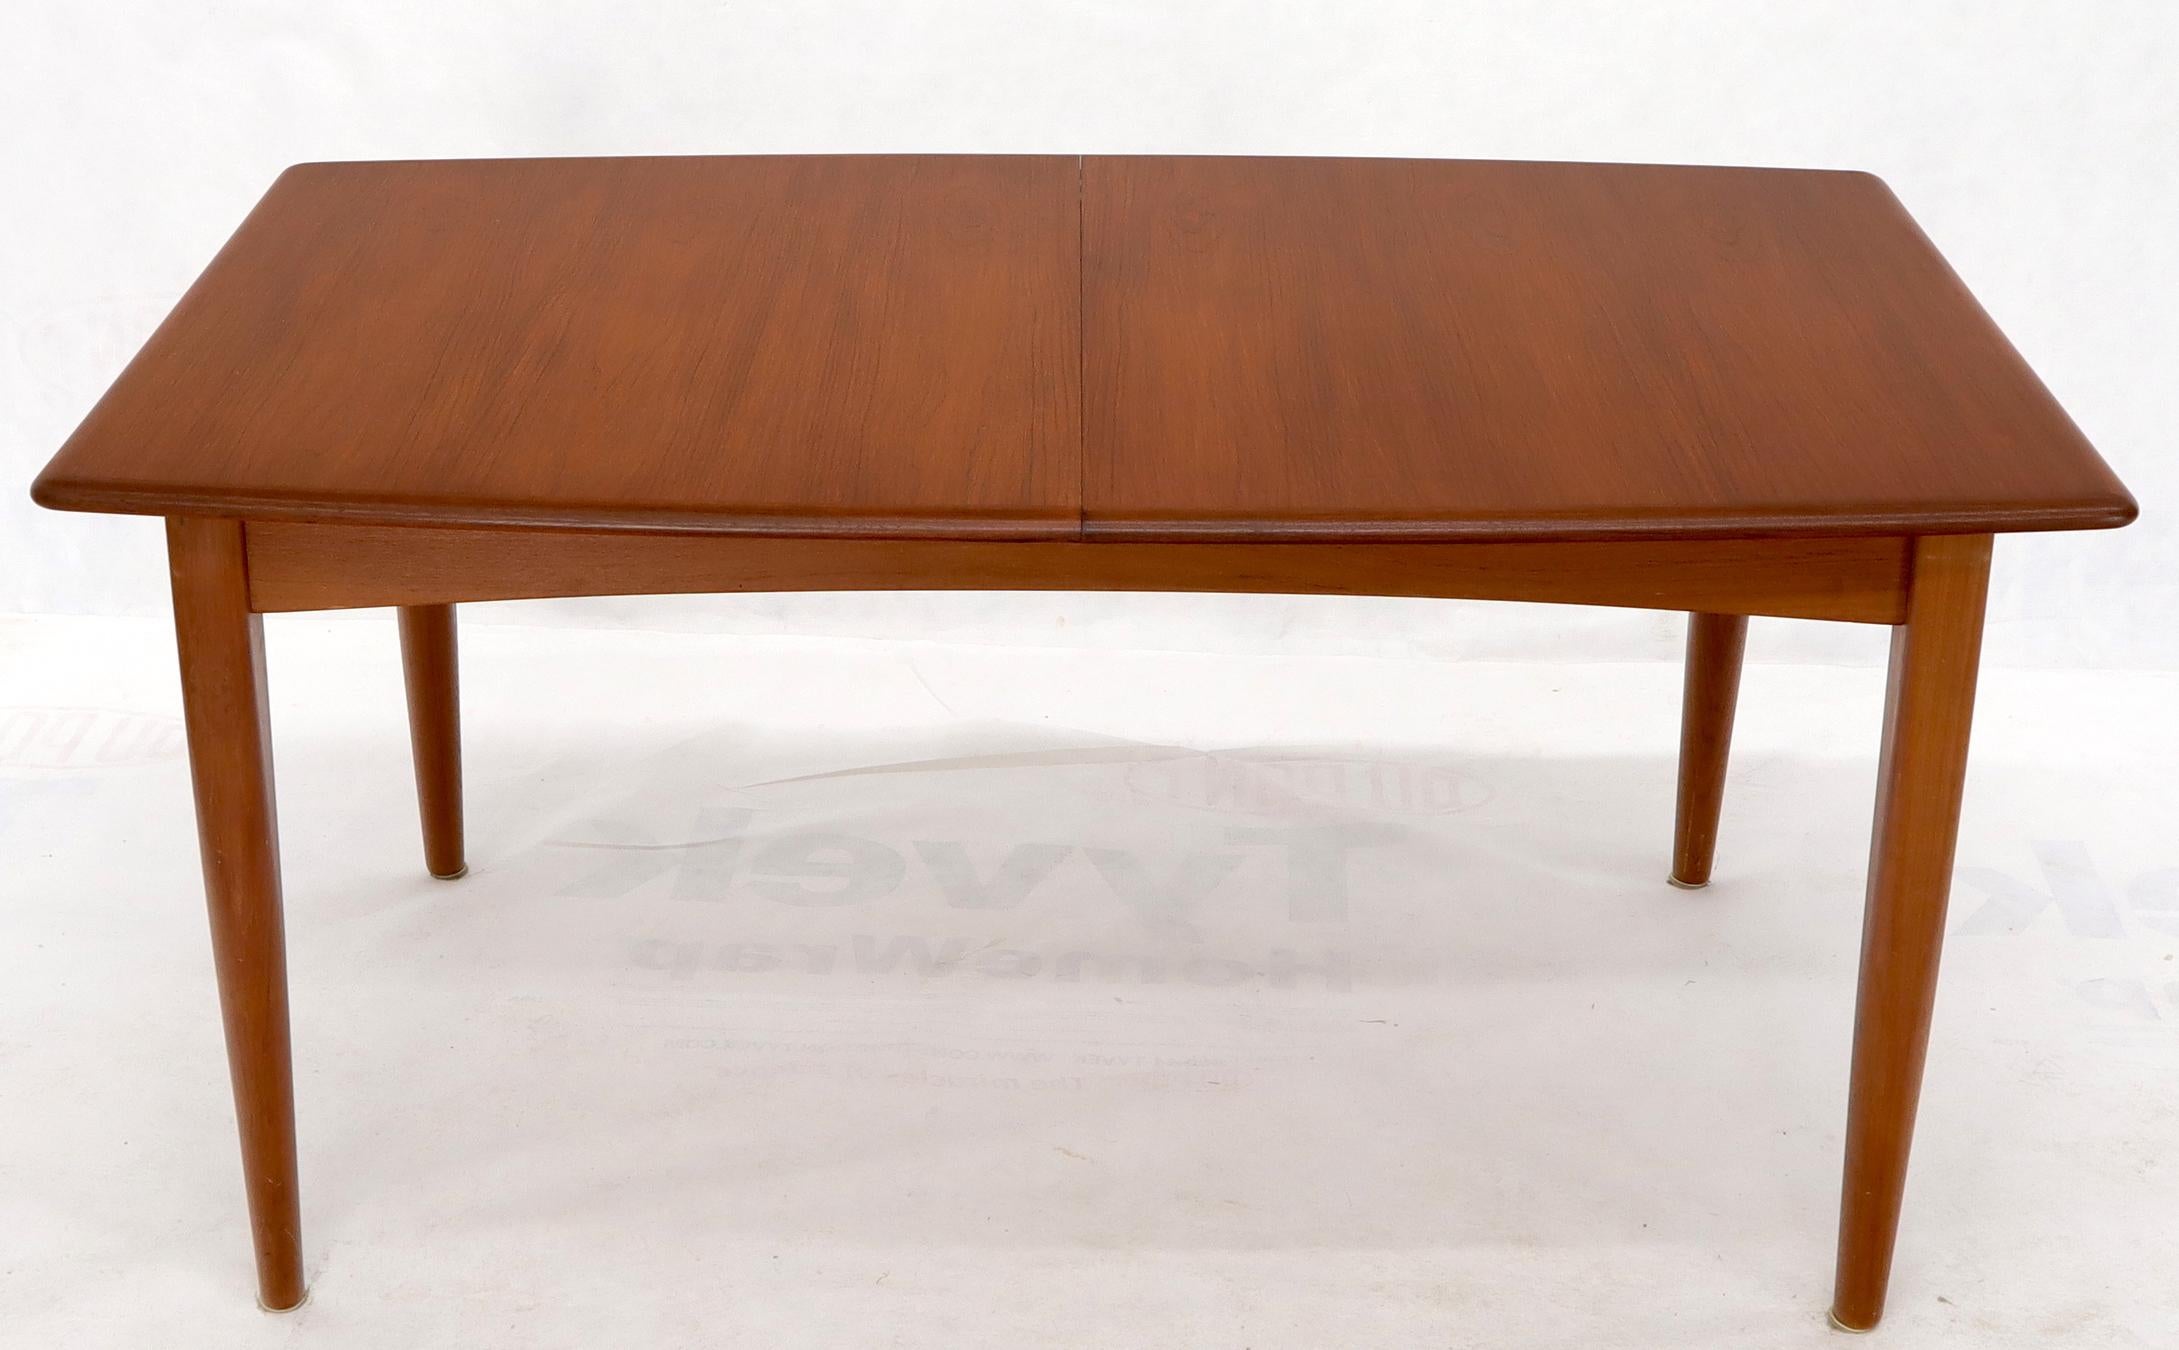 Danish Mid-Century Modern Teak Dining Table with Two Pop Up Self Storing Leaves For Sale 2